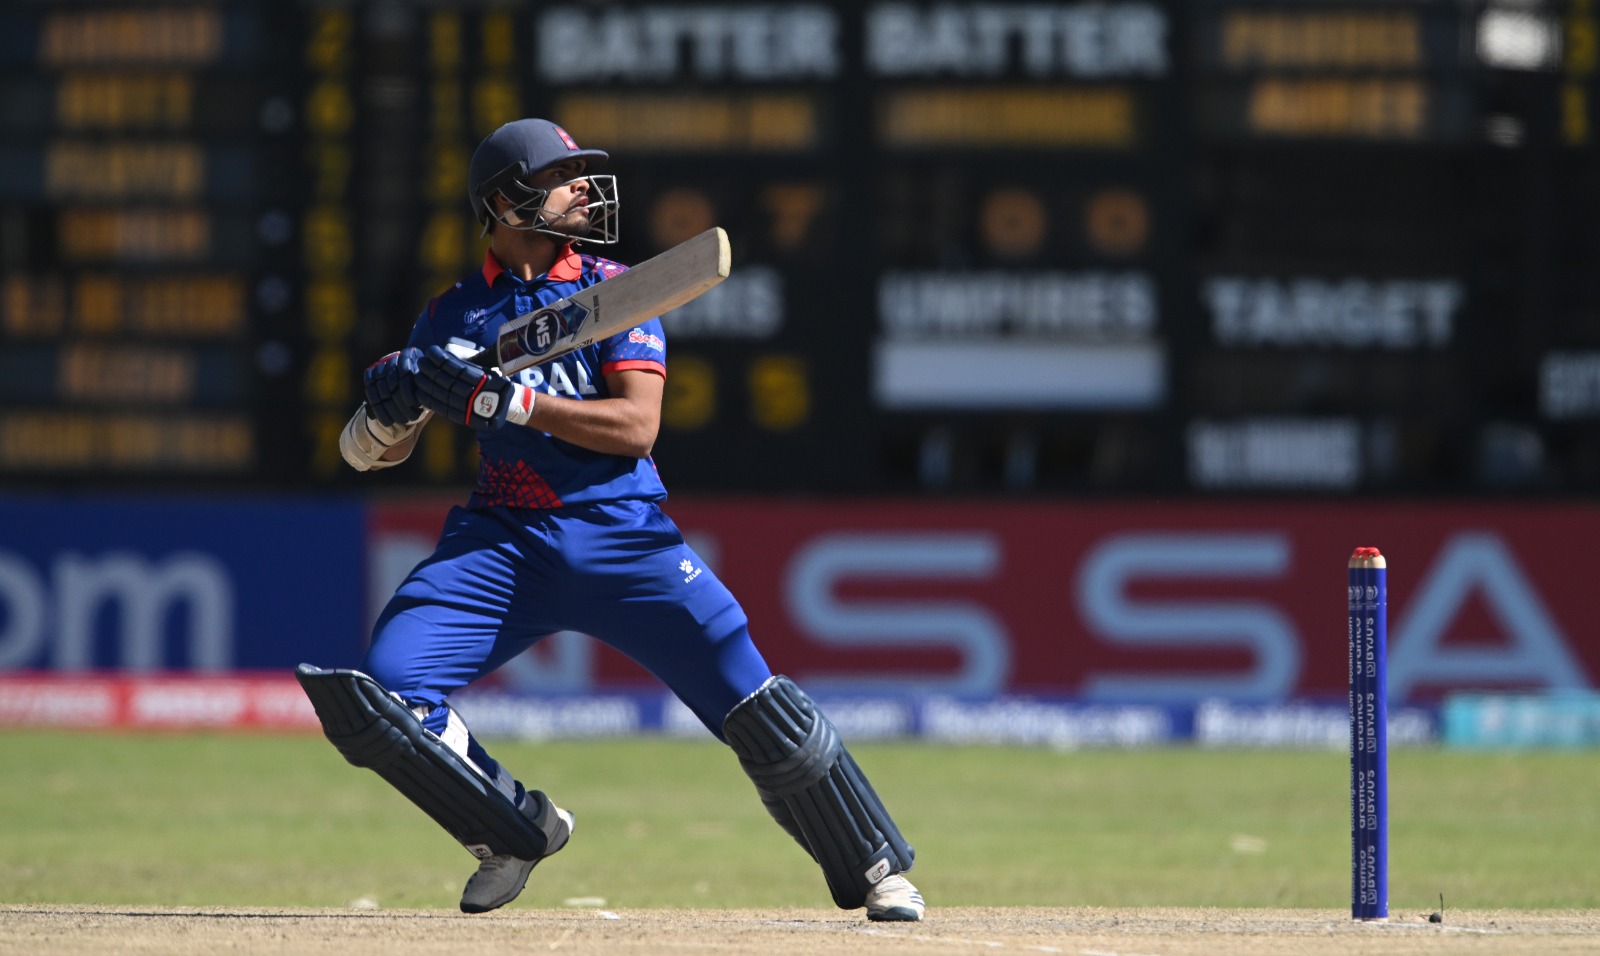 Nepal lost the eighth wicket, Gulshan out for 5 runs